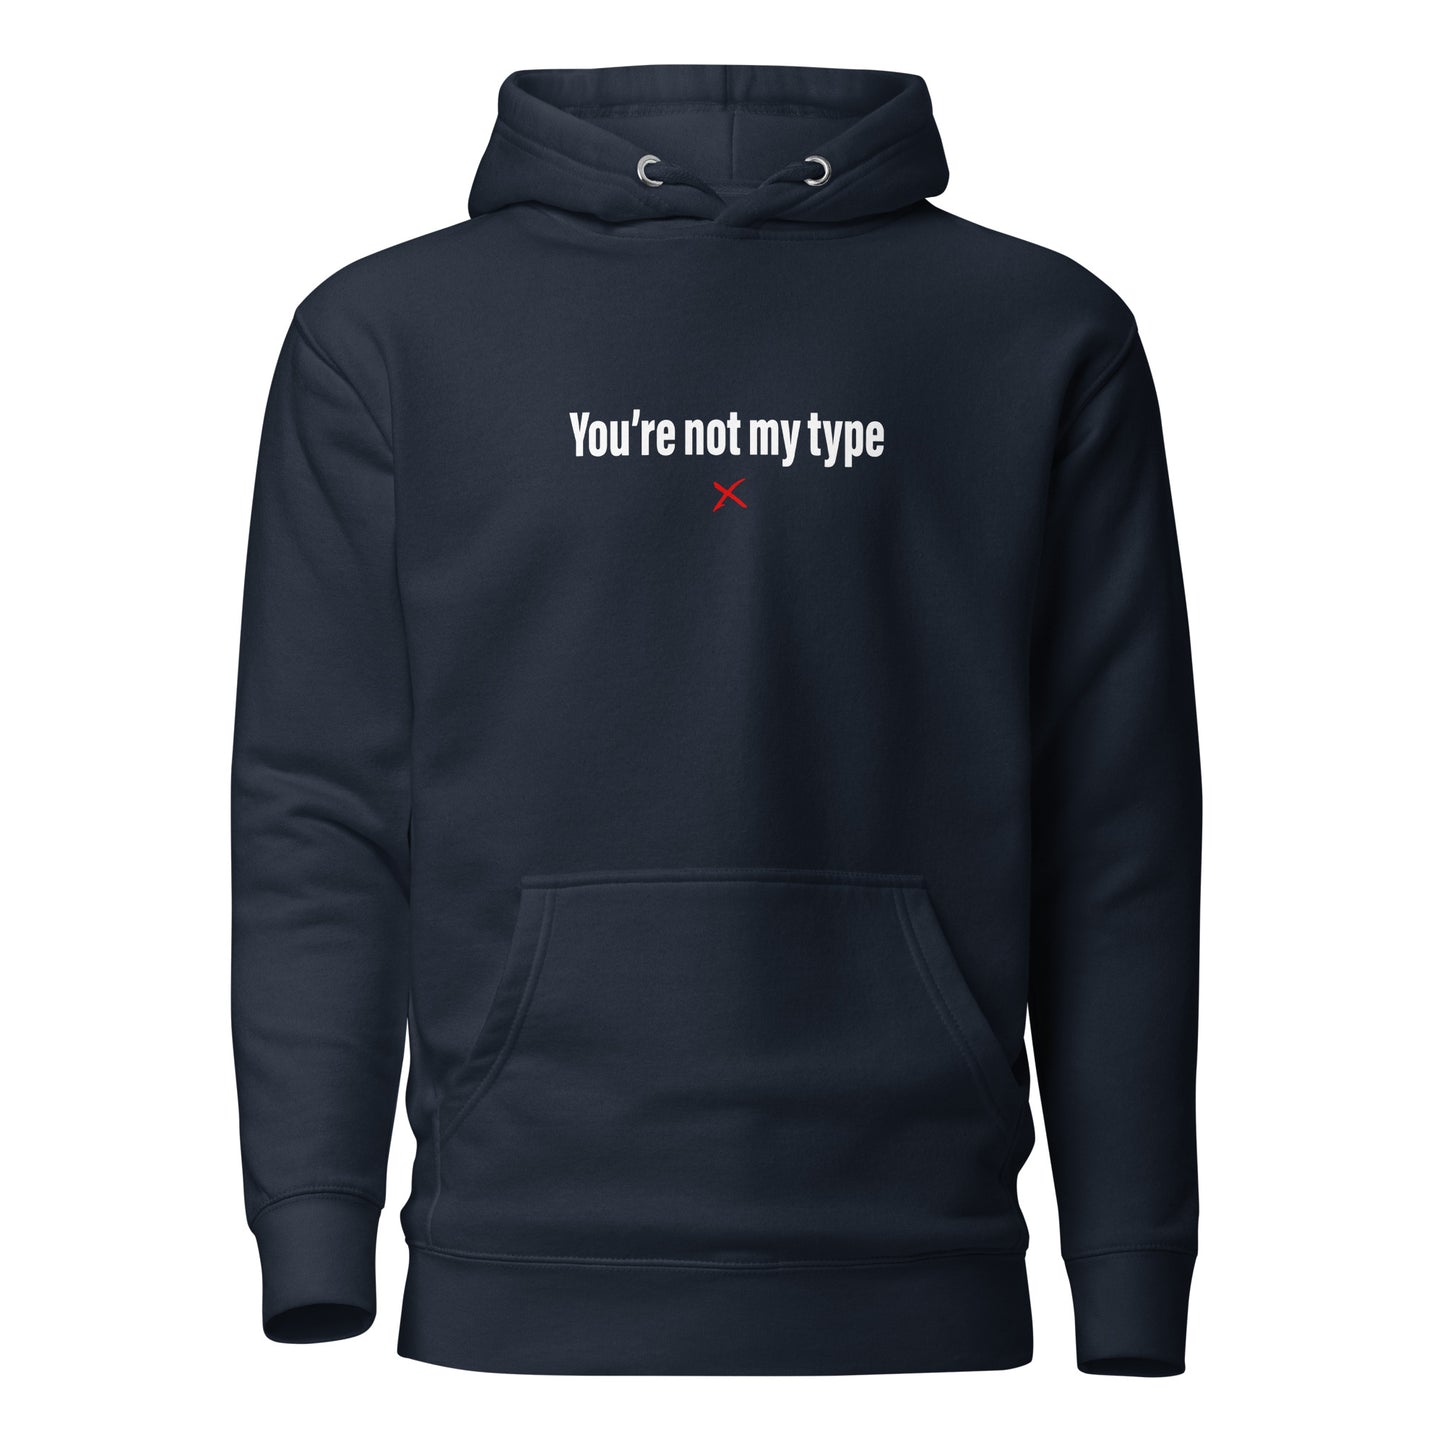 You're not my type - Hoodie